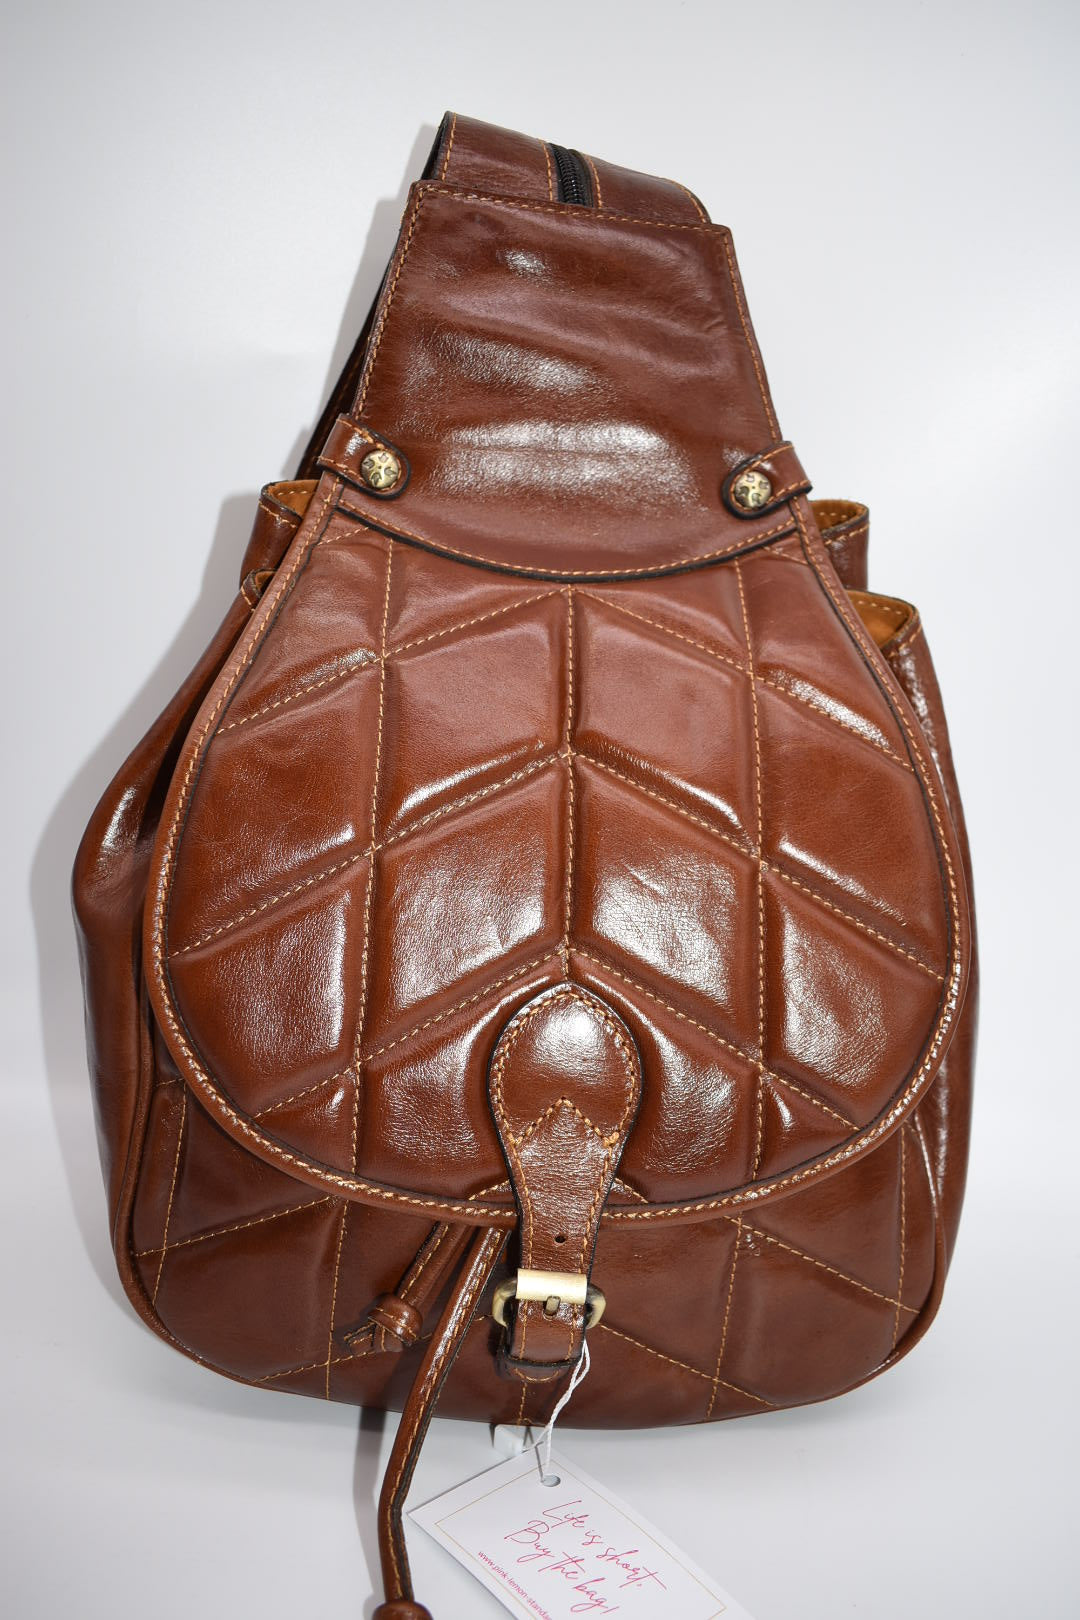 Patricia Nash Itala Saddle Sling in Quilted Vintage Distressed Leather